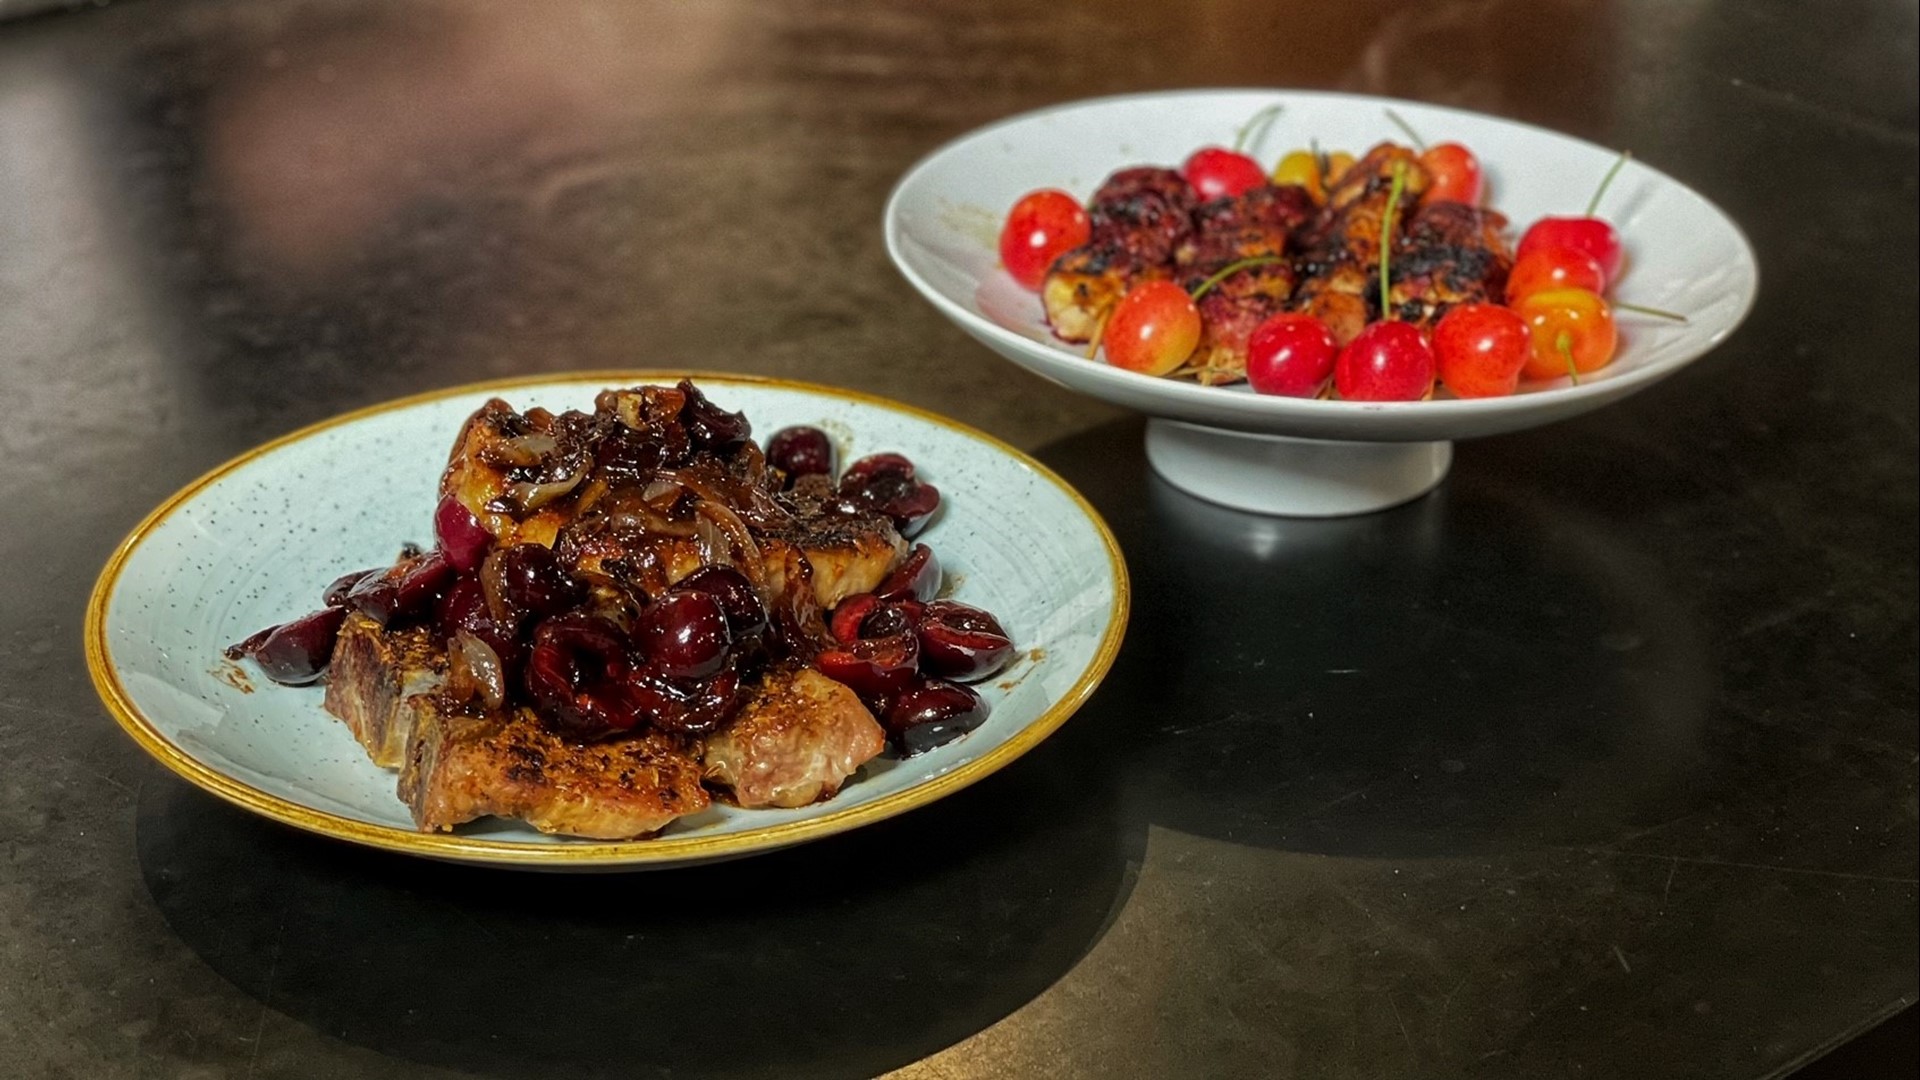 Cherries and meat make yummy friends. #k5evening